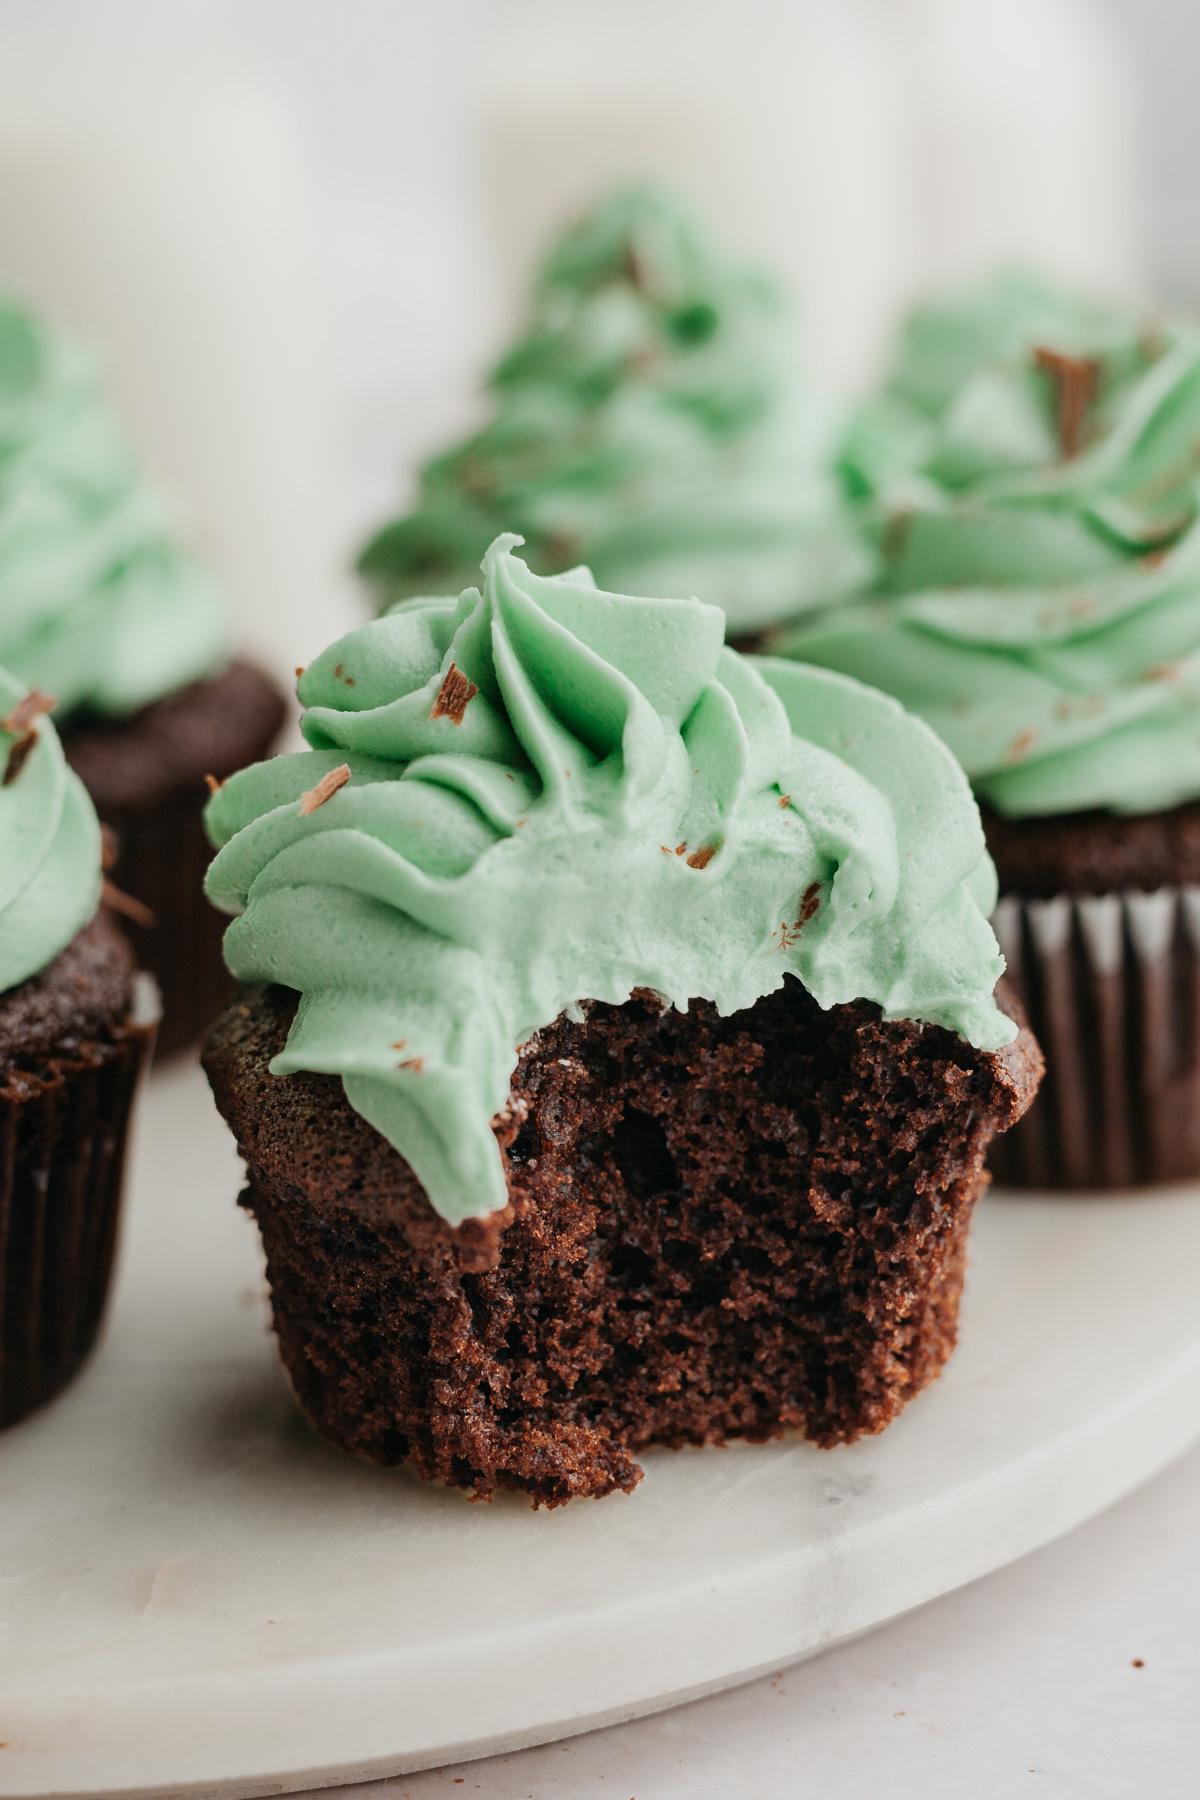 A close up of a chocolate cupcake with green frosting, a bite has been taken out of the cupcake.